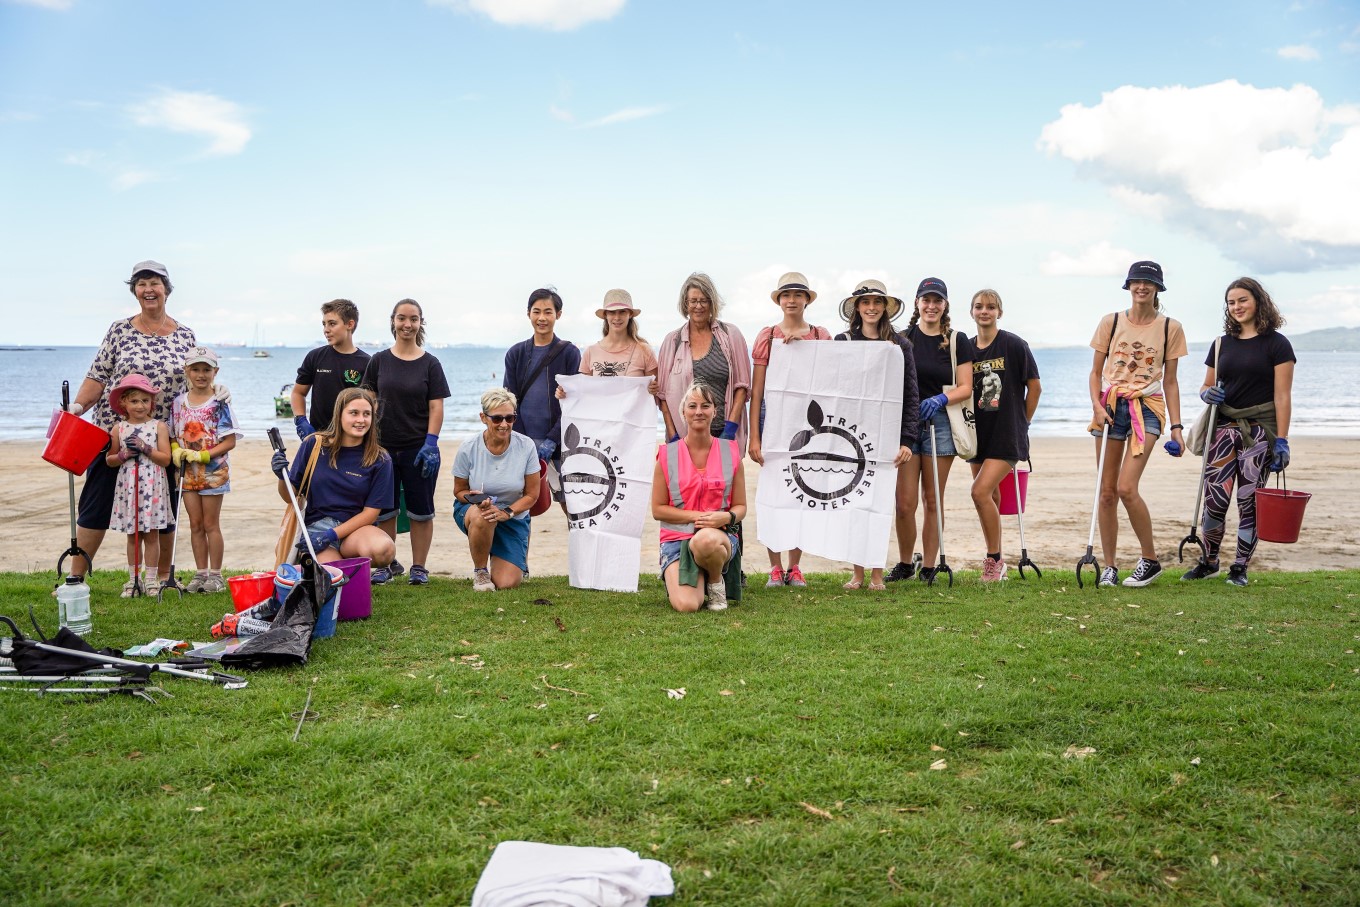 Emma Wingrove (centre in pink high-vis vest) started North Shore group Clean Up Crew in 2014 because she couldn’t stand seeing so much rubbish on the beach and wanted to do something about it.